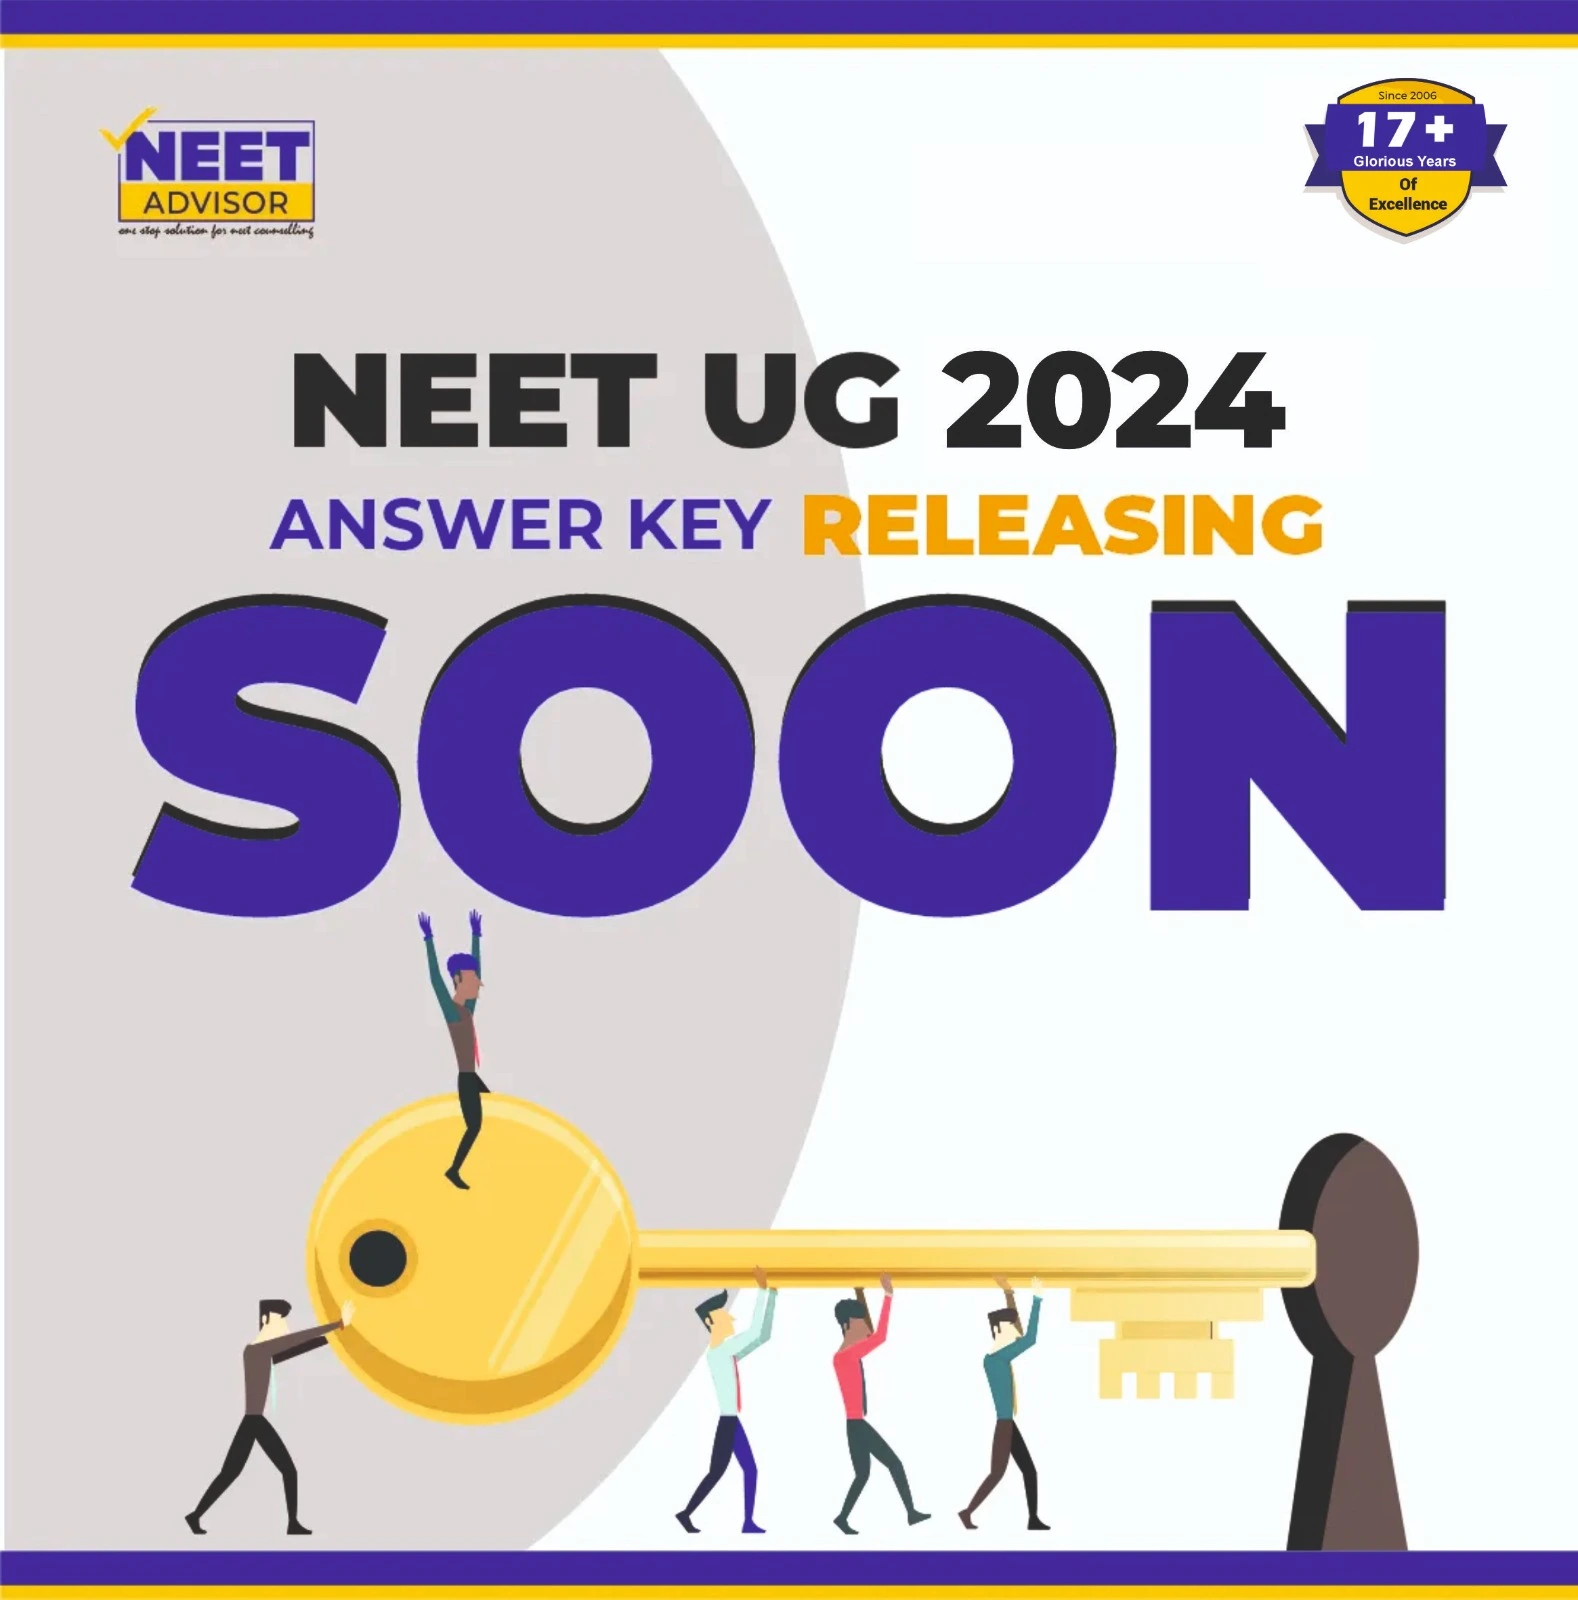 Neet 2024 answer key revealed. How to check?